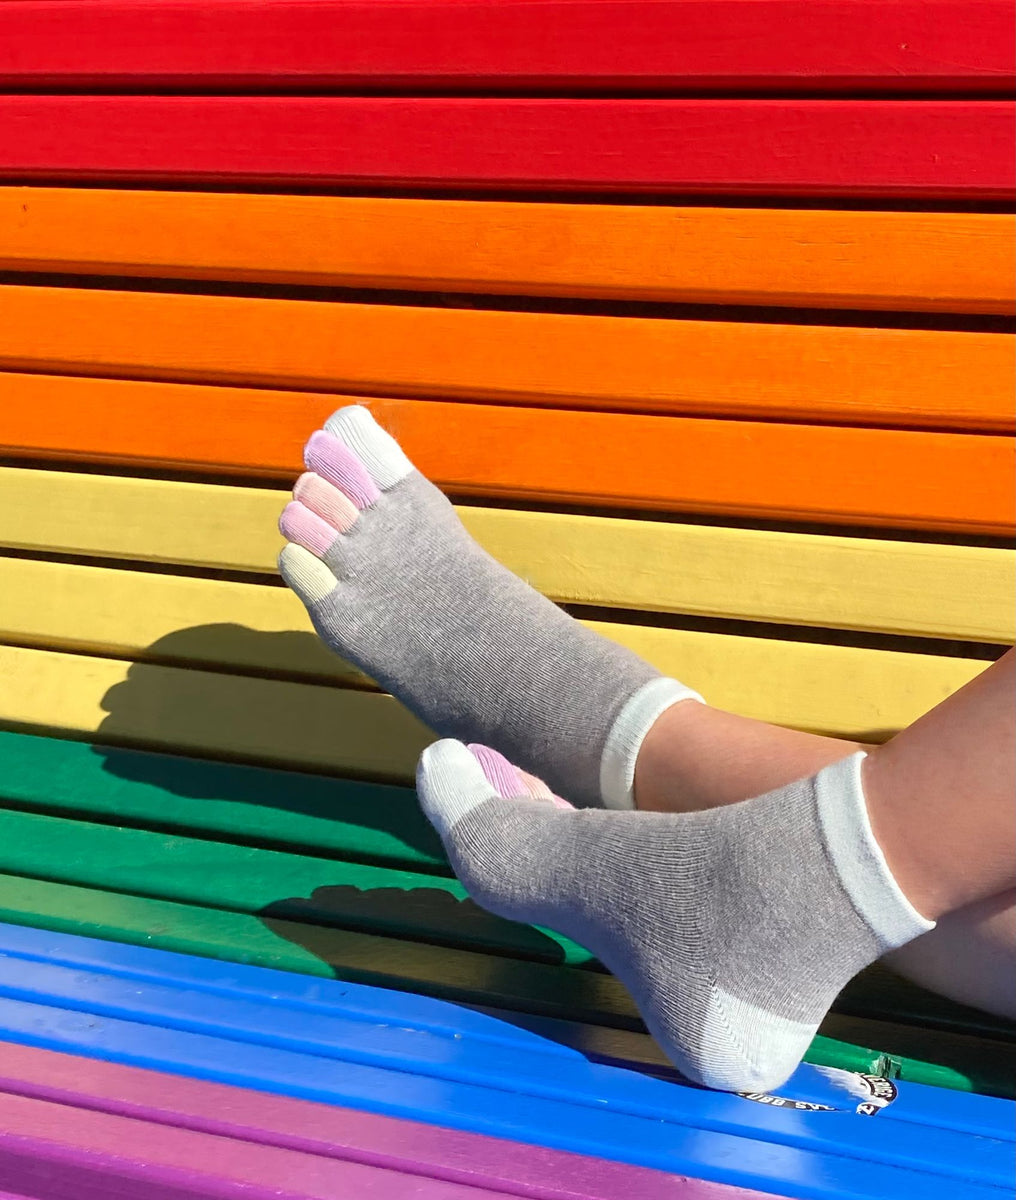 Knitido - Rainbows, short socks with colourful toes - The Barefoot Lab -  Free your feet